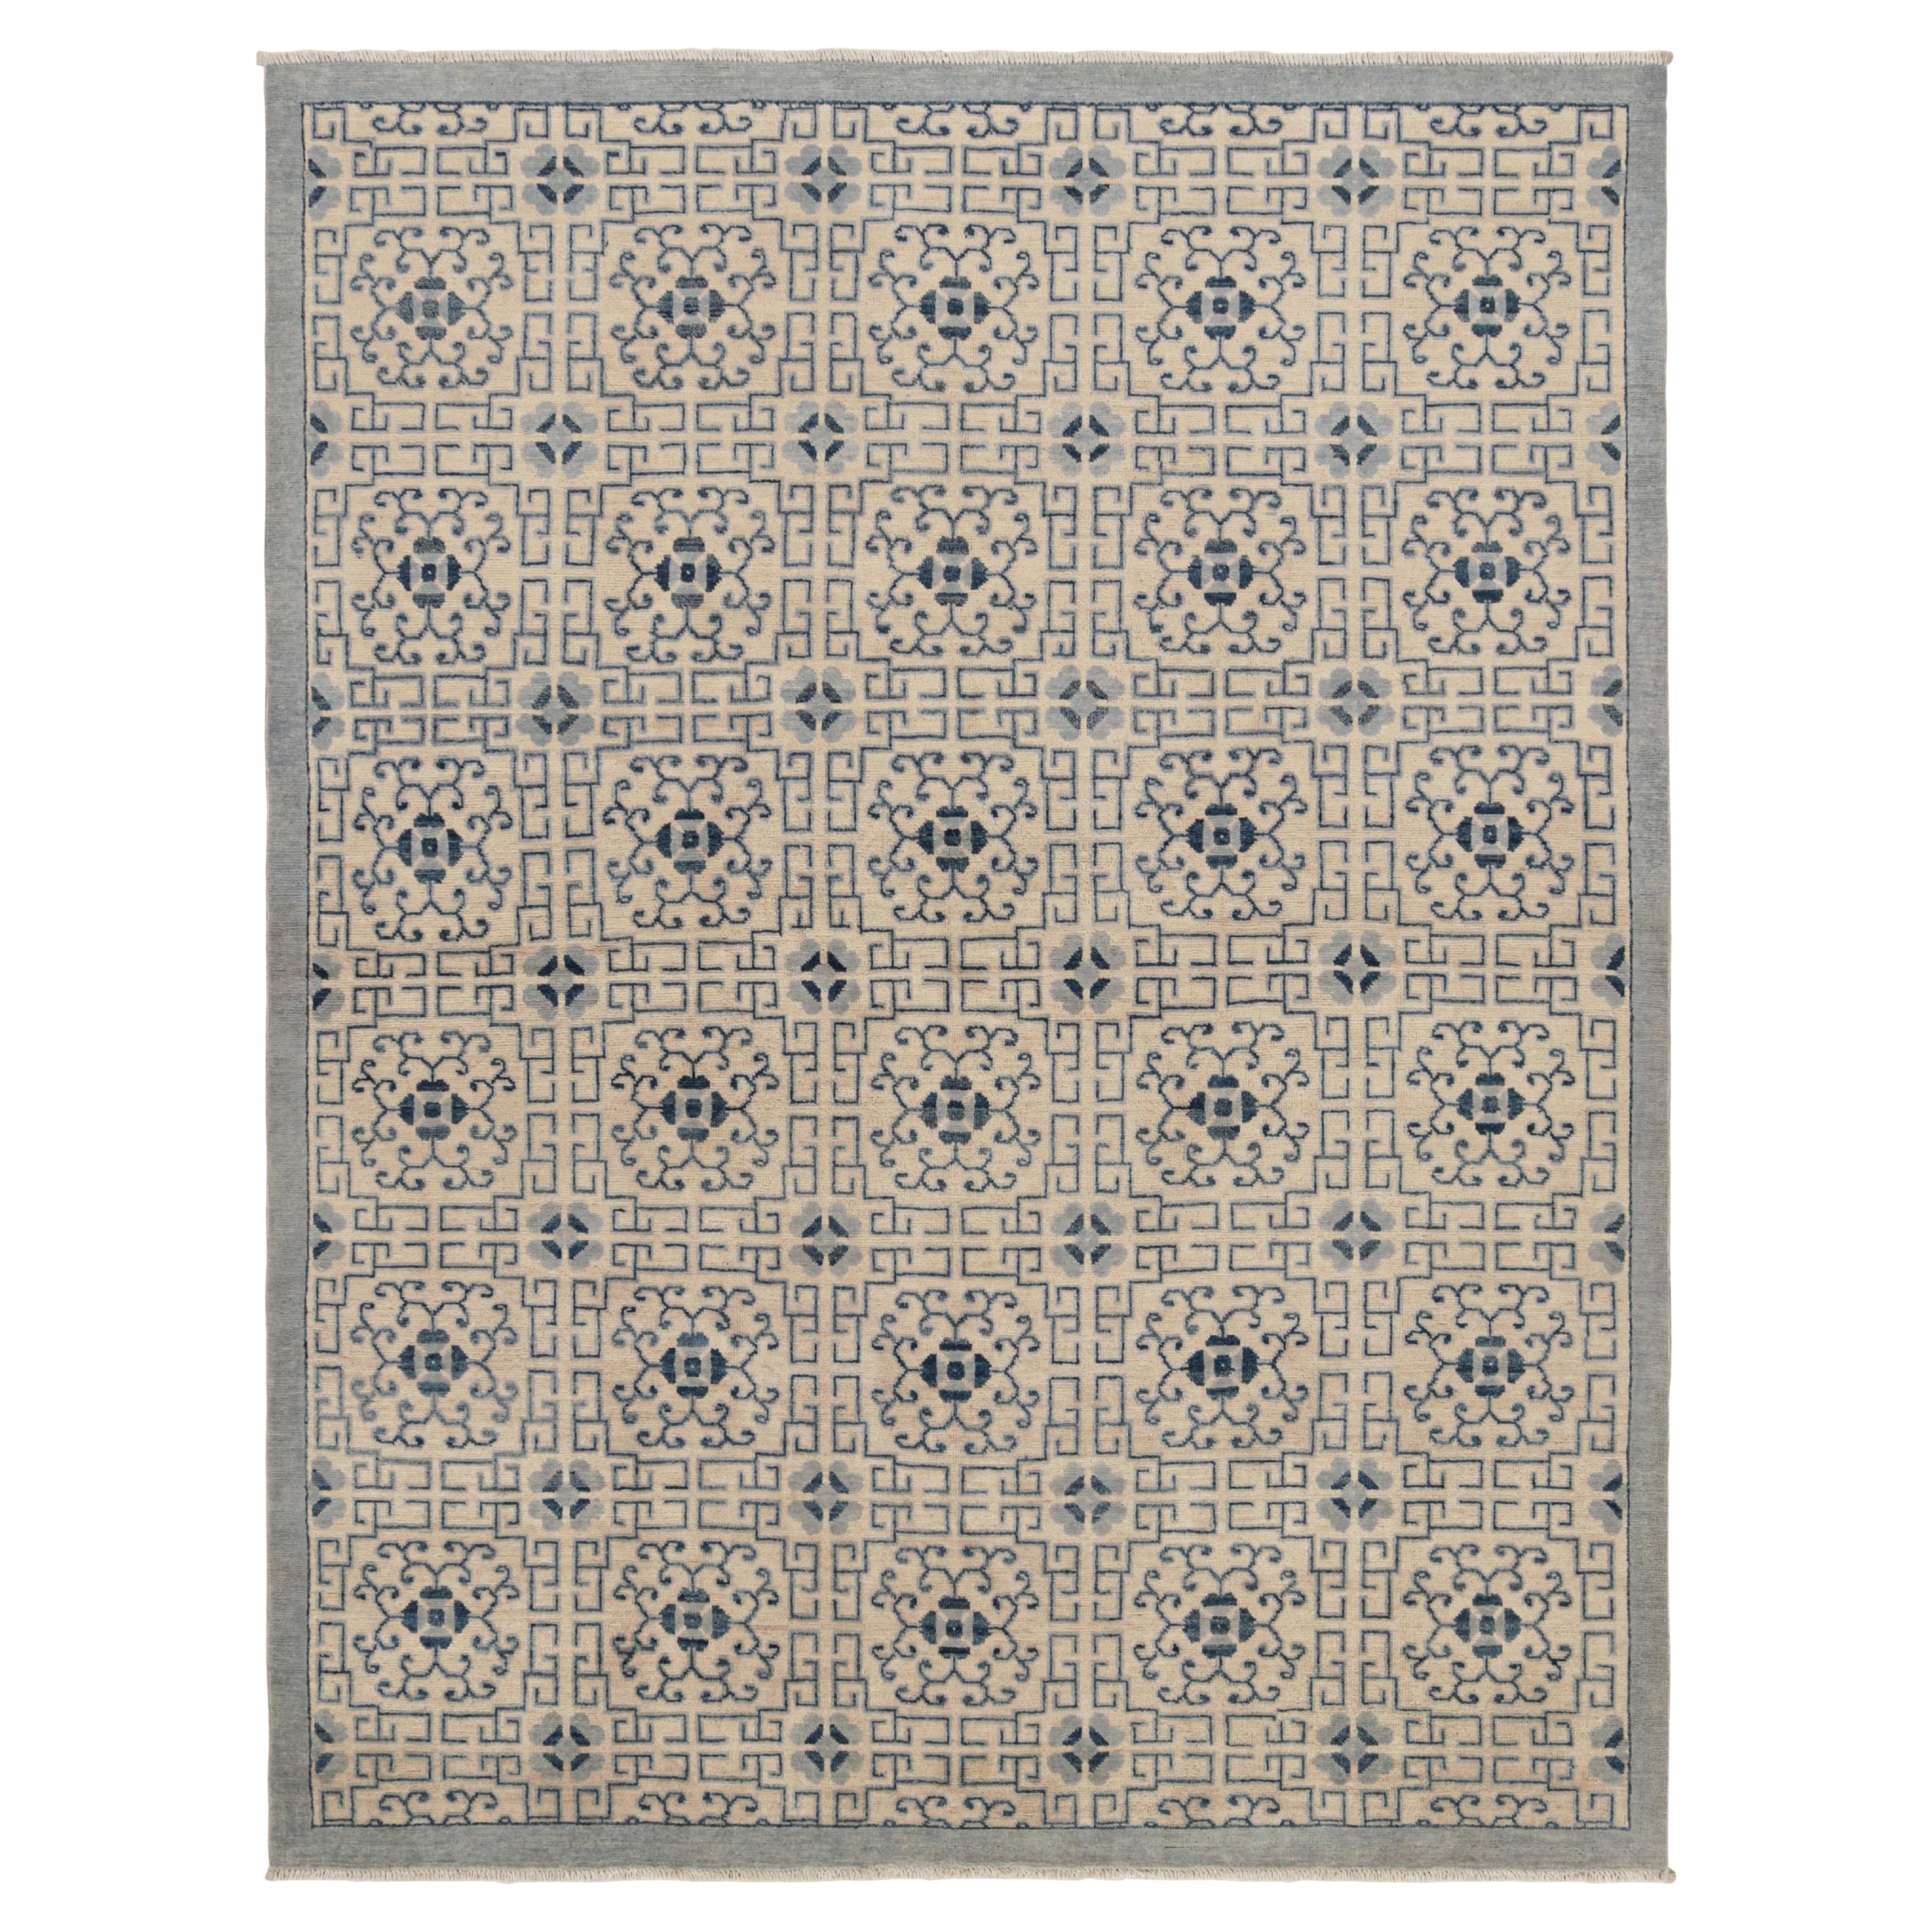 Rug & Kilim’s Art Deco Style Rug in White with Blue Geometric Patterns